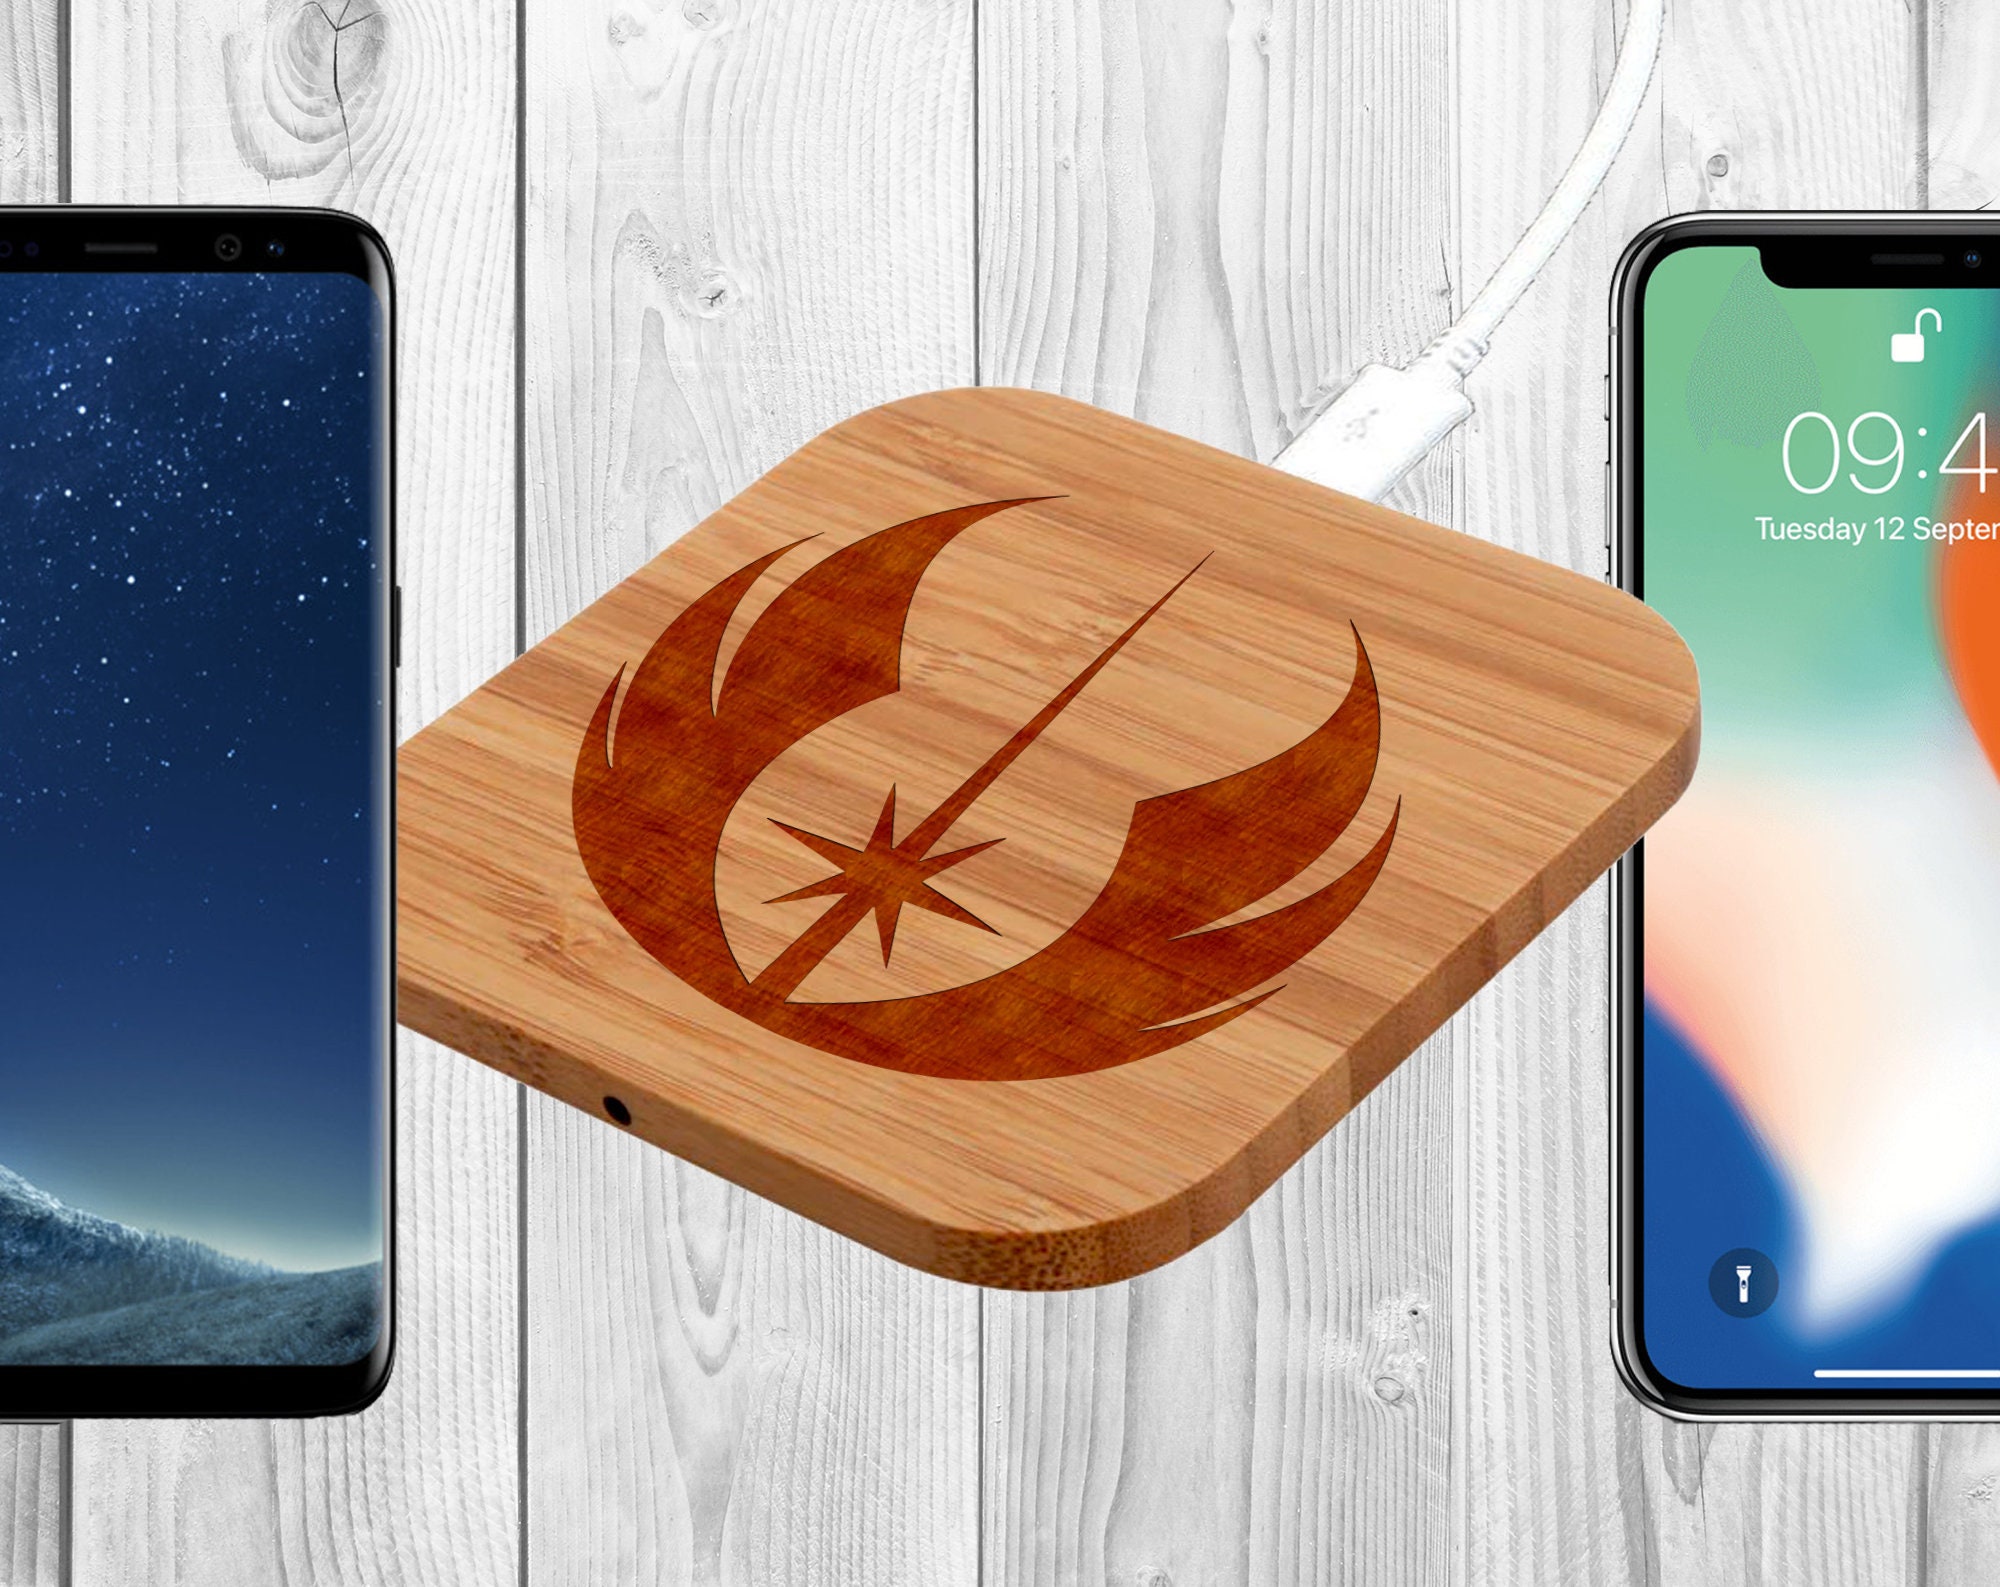 Star Wars Wooden Wireless Qi Charger Jedi Order Wooden Gift - Etsy